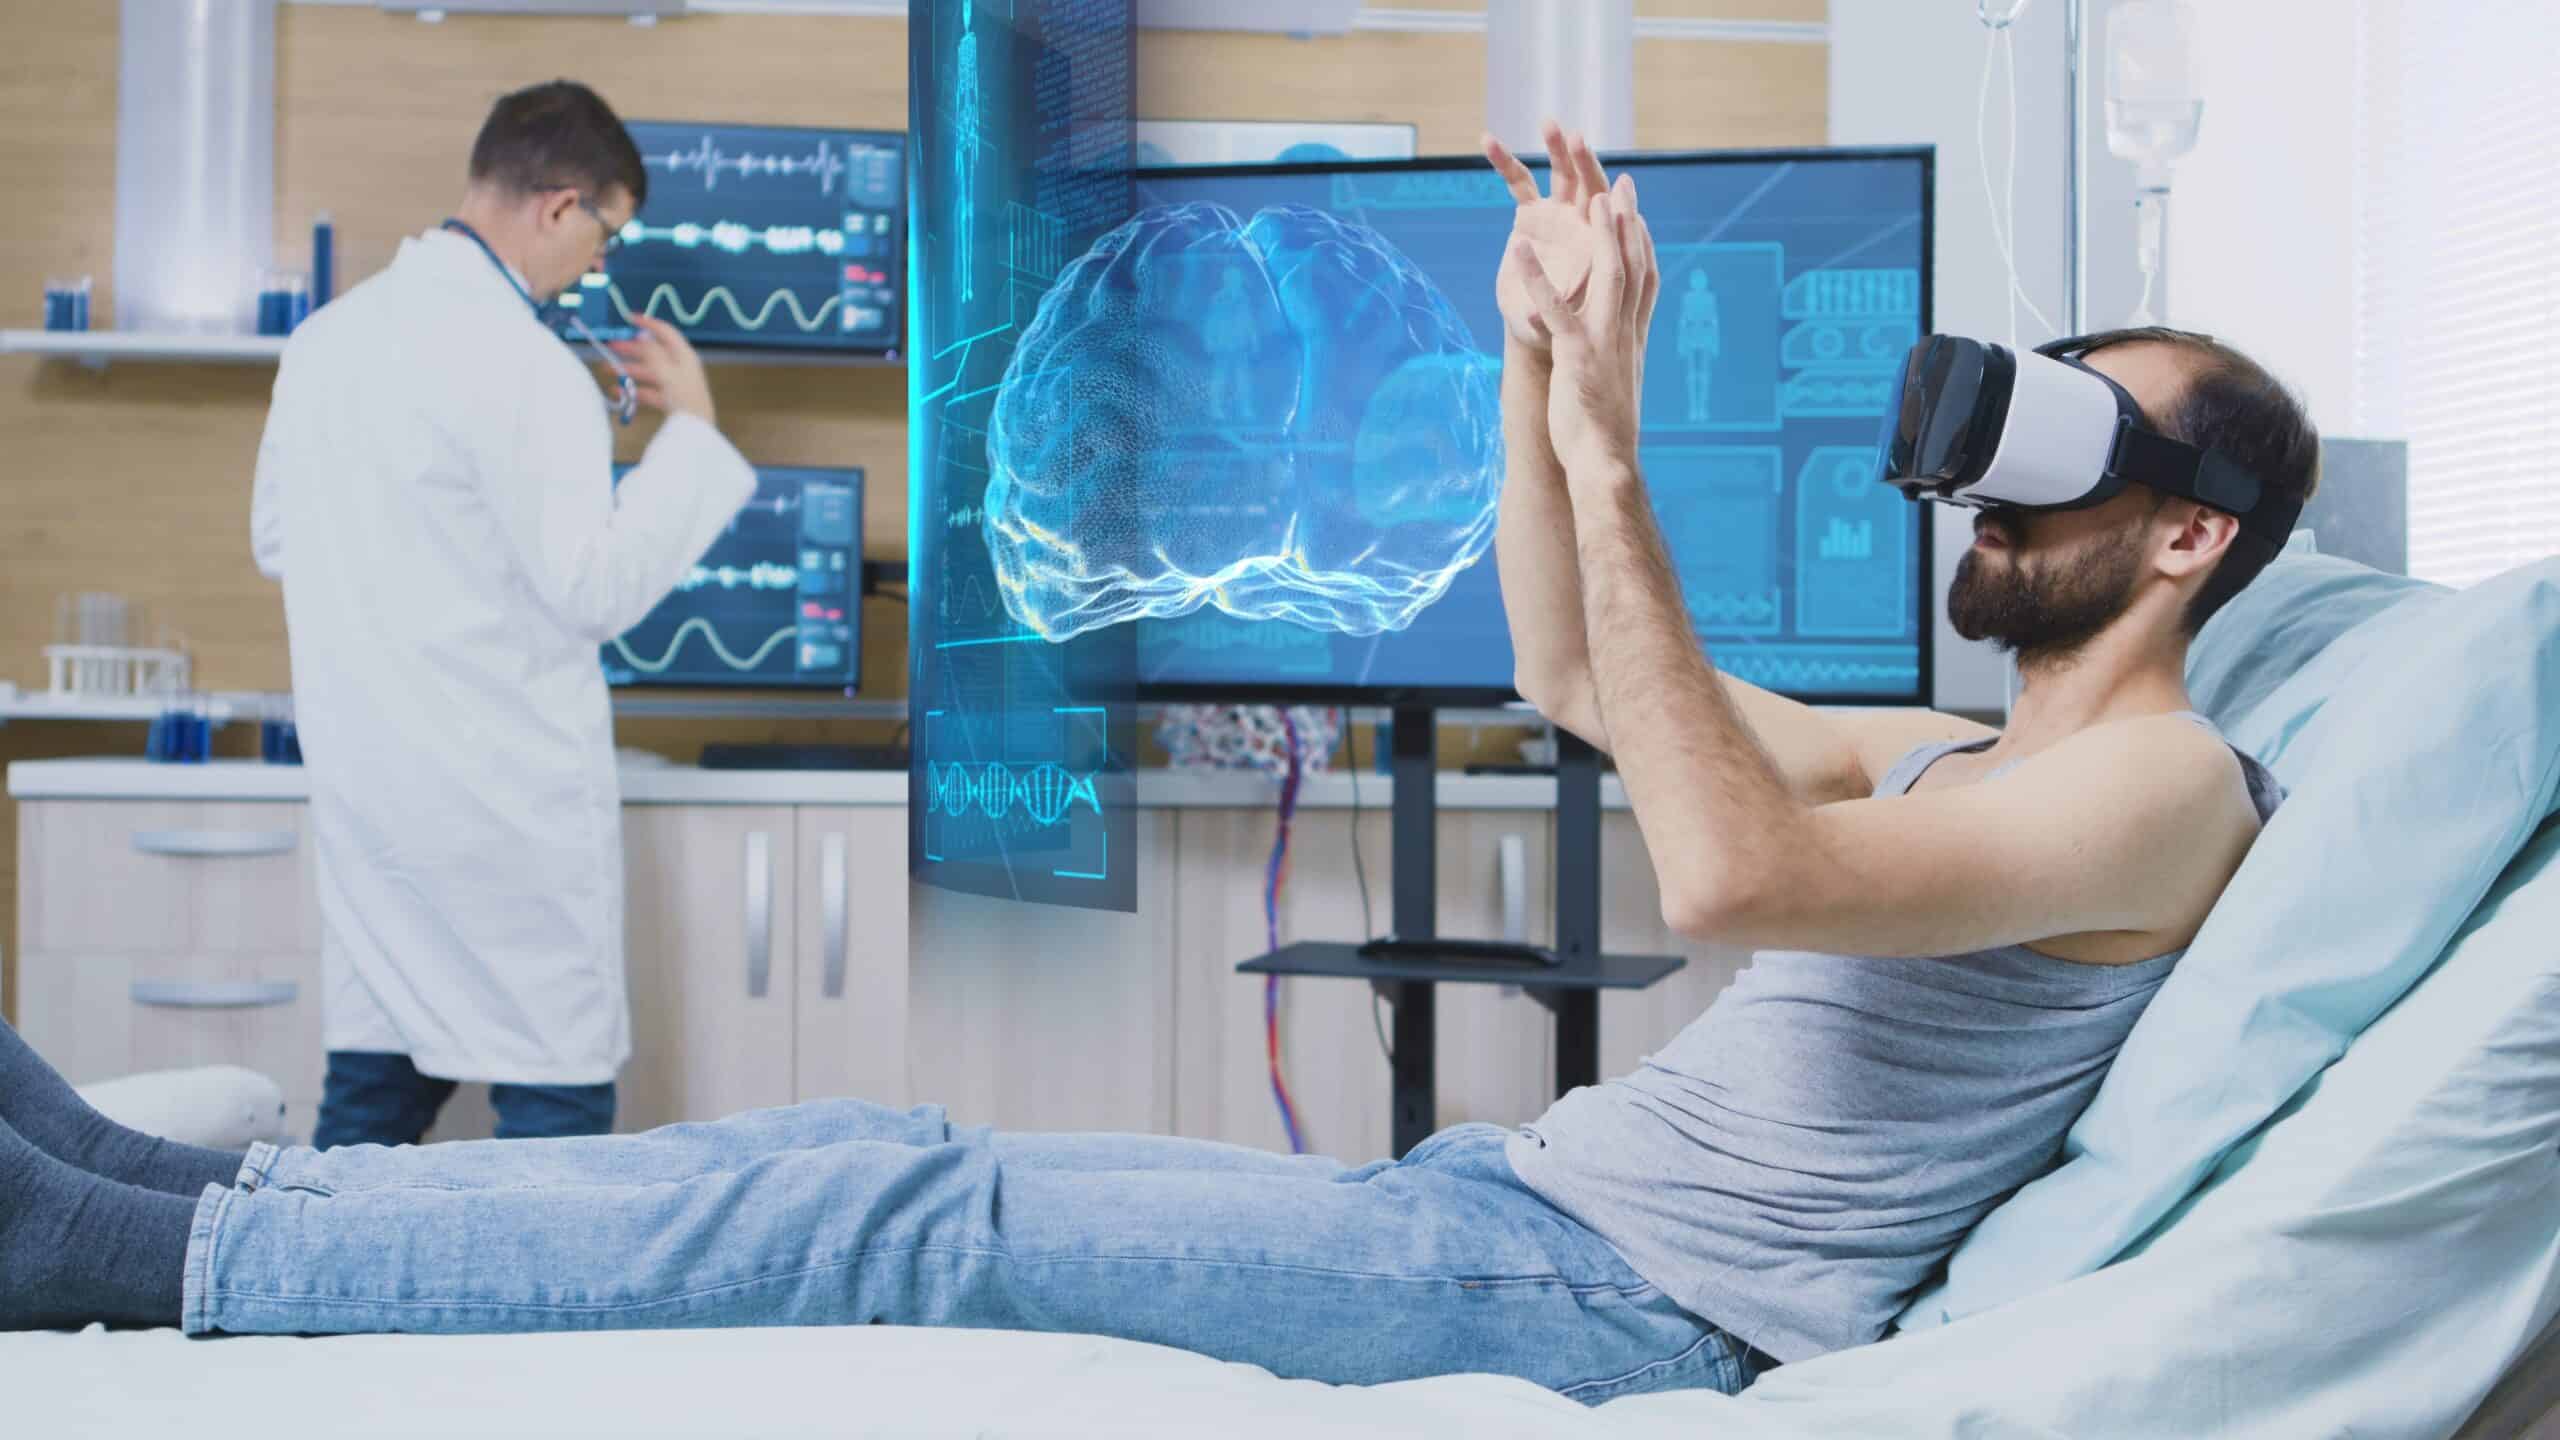 A man is lying in a hospital bed wearing a VR headset and manipulating a virtual screen floating in front of him. Next to him is a doctor and a screen showing medical infographics